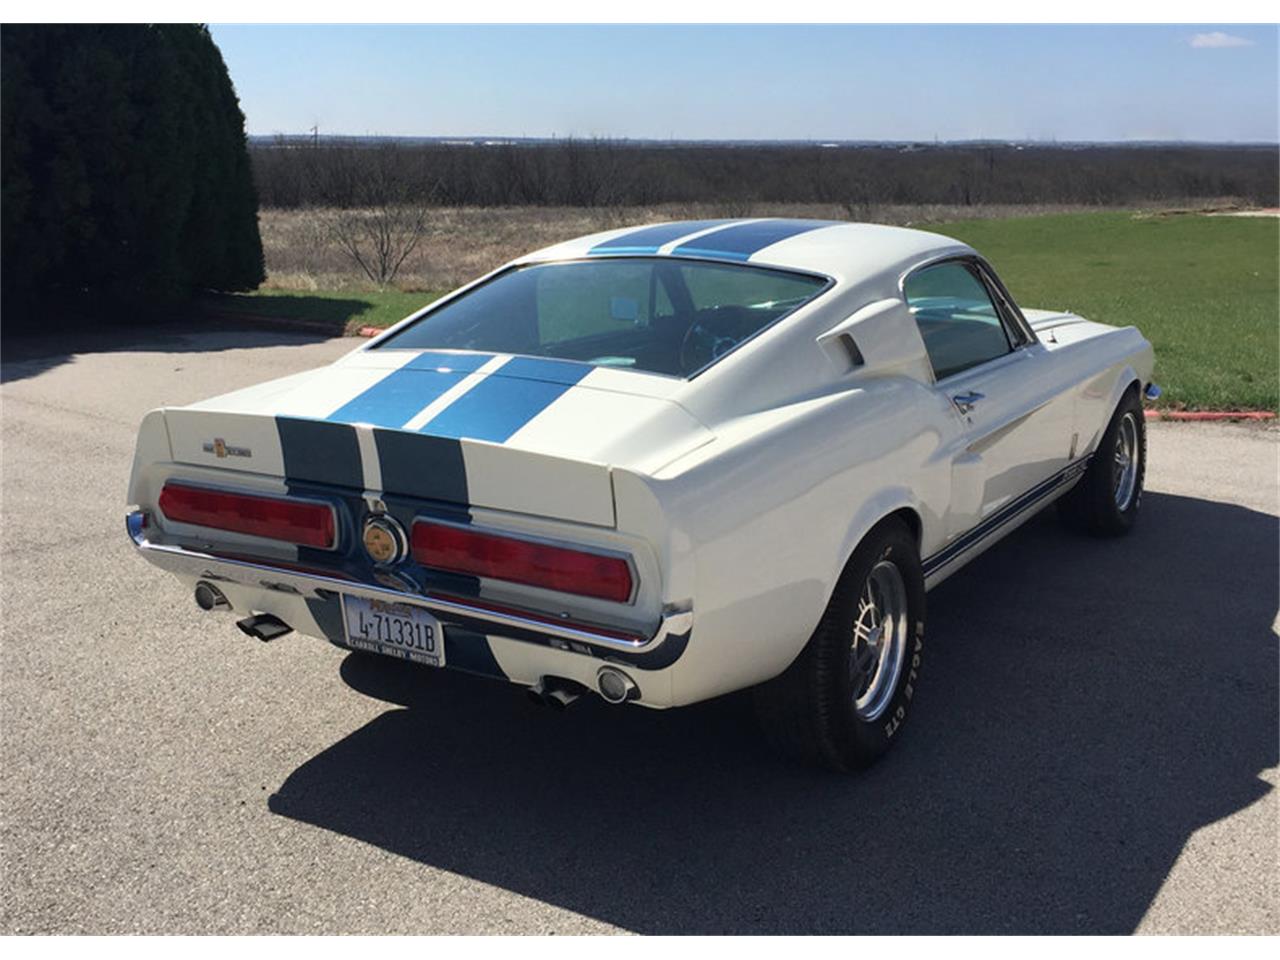 1967 Ford Mustang Shelby GT350 Tribute for Sale | ClassicCars.com | CC ...